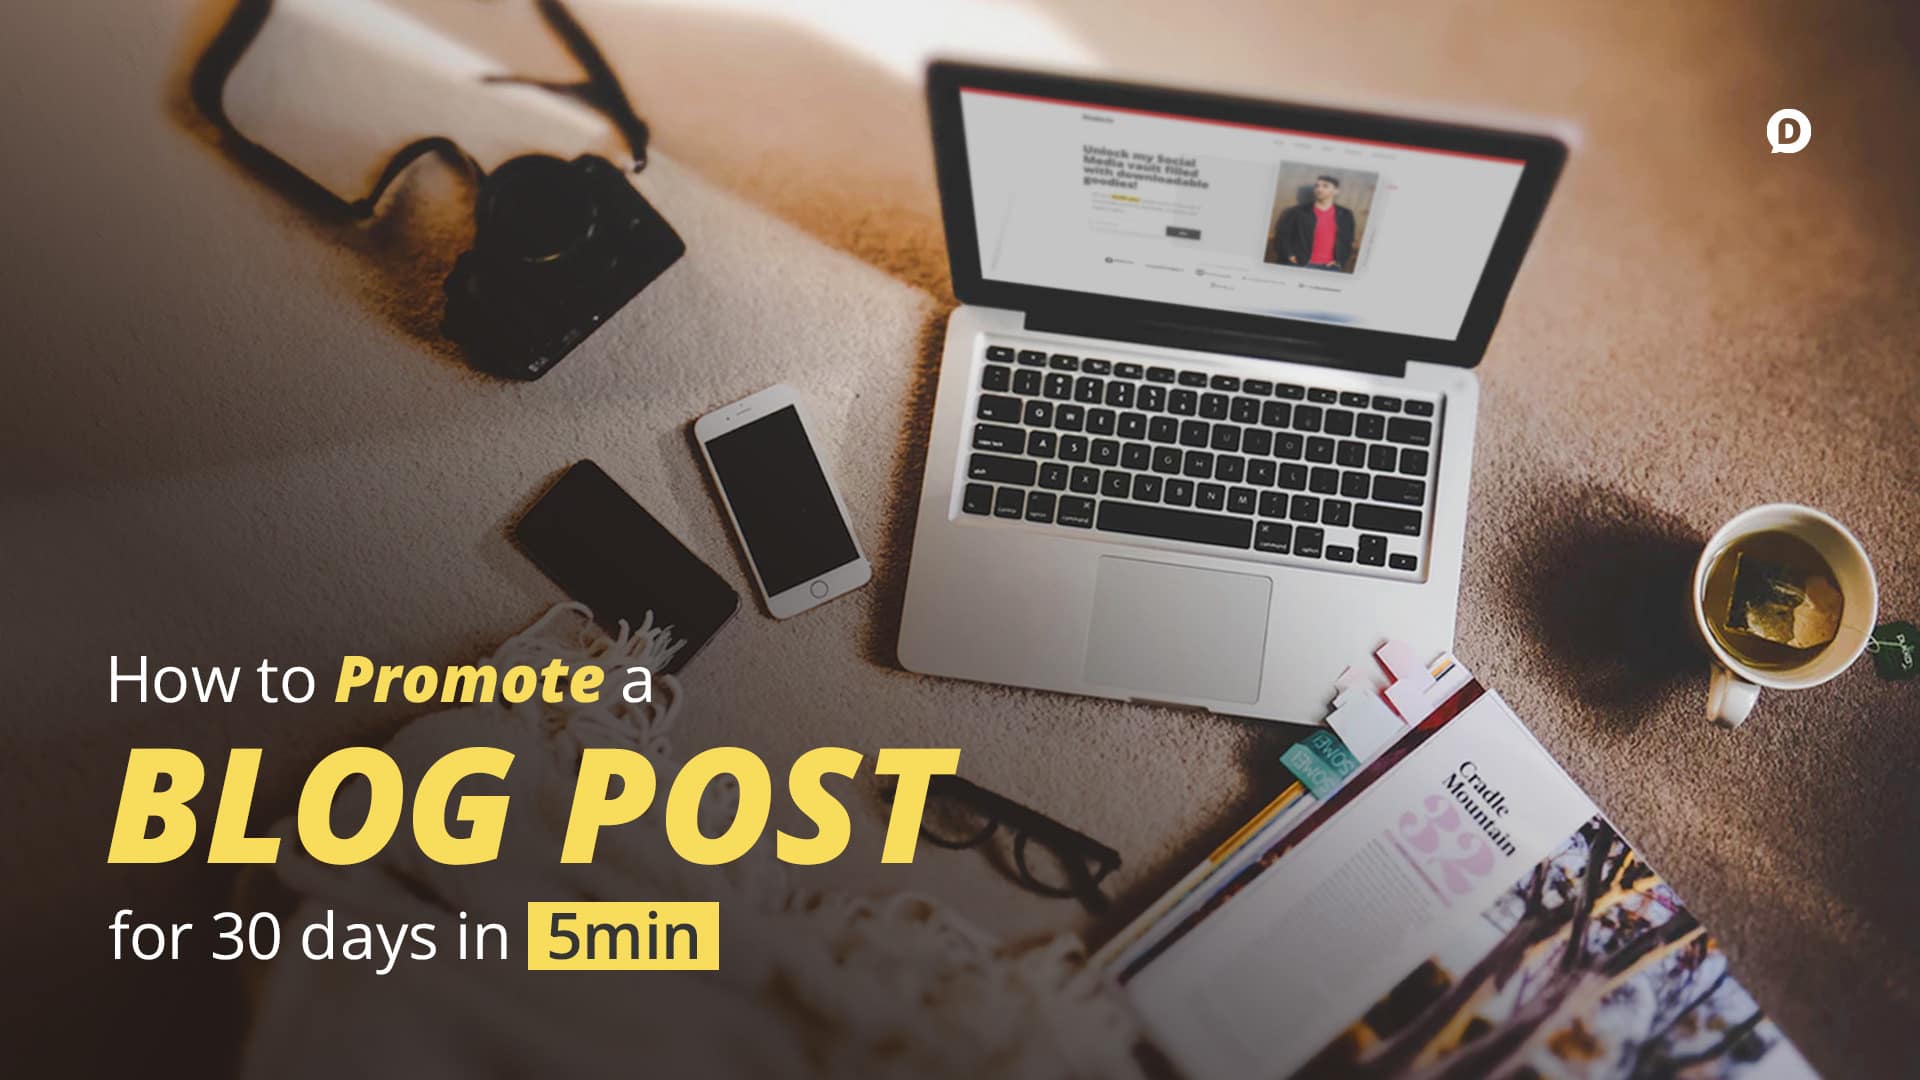 How to Promote an Epic Blog Post for 30 Days in 5min